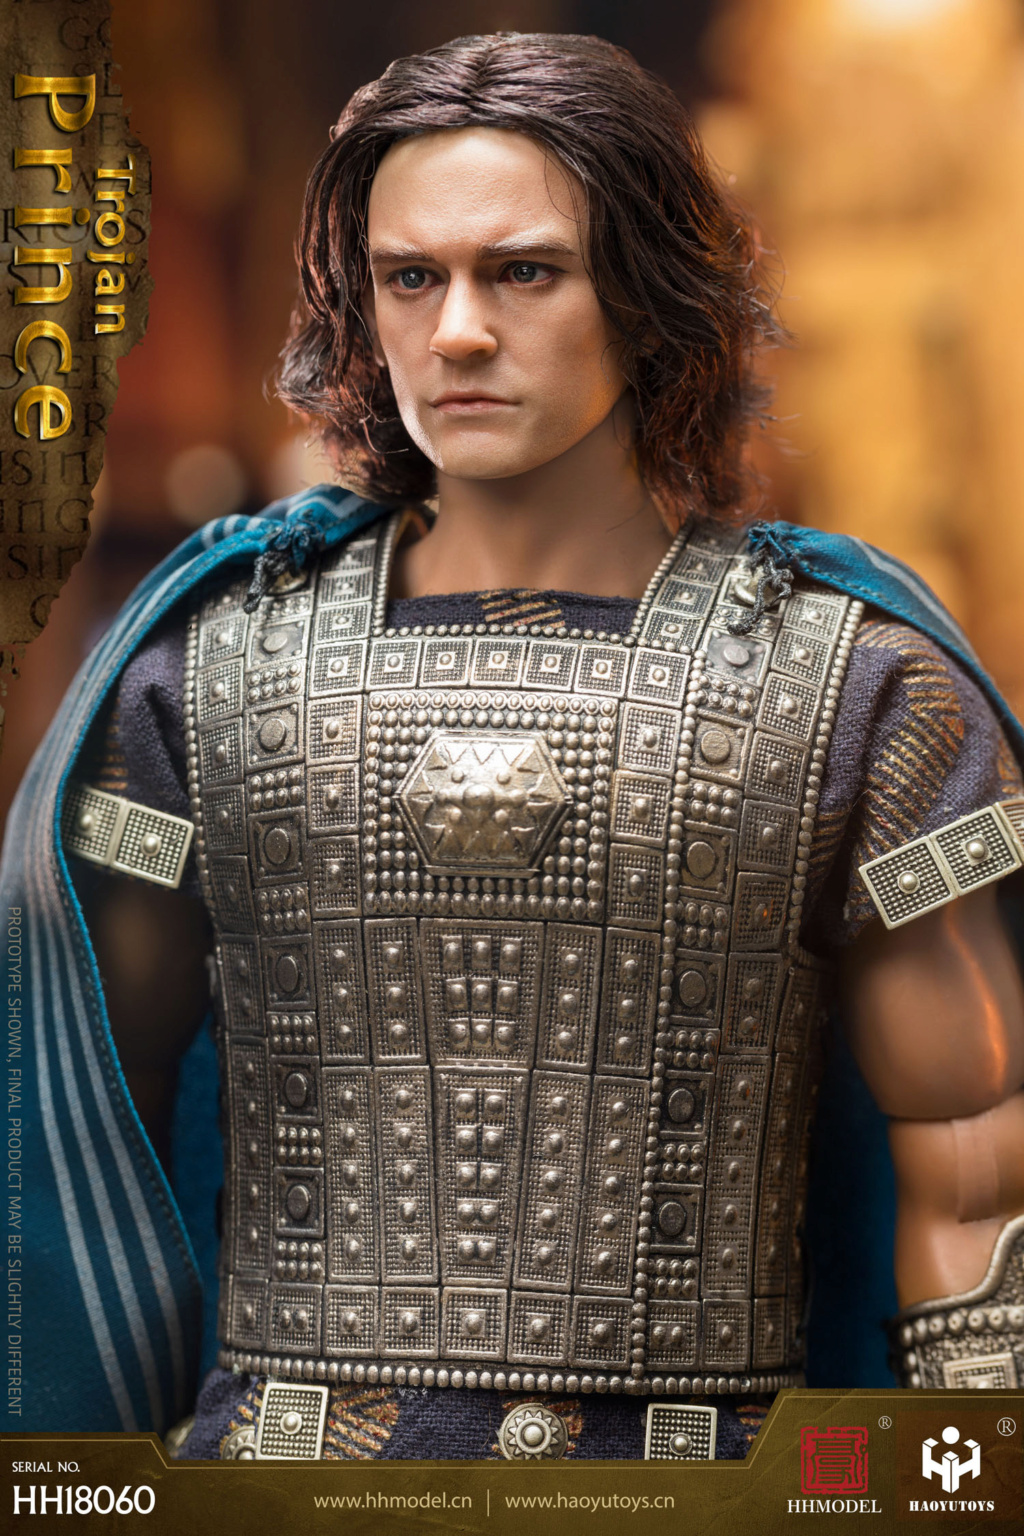 TroyPrince - NEW PRODUCT: HHMODEL & HAOYUTOYS: 1/6 Empire Legion - Troy Prince Action Figure #HH18060 16280110